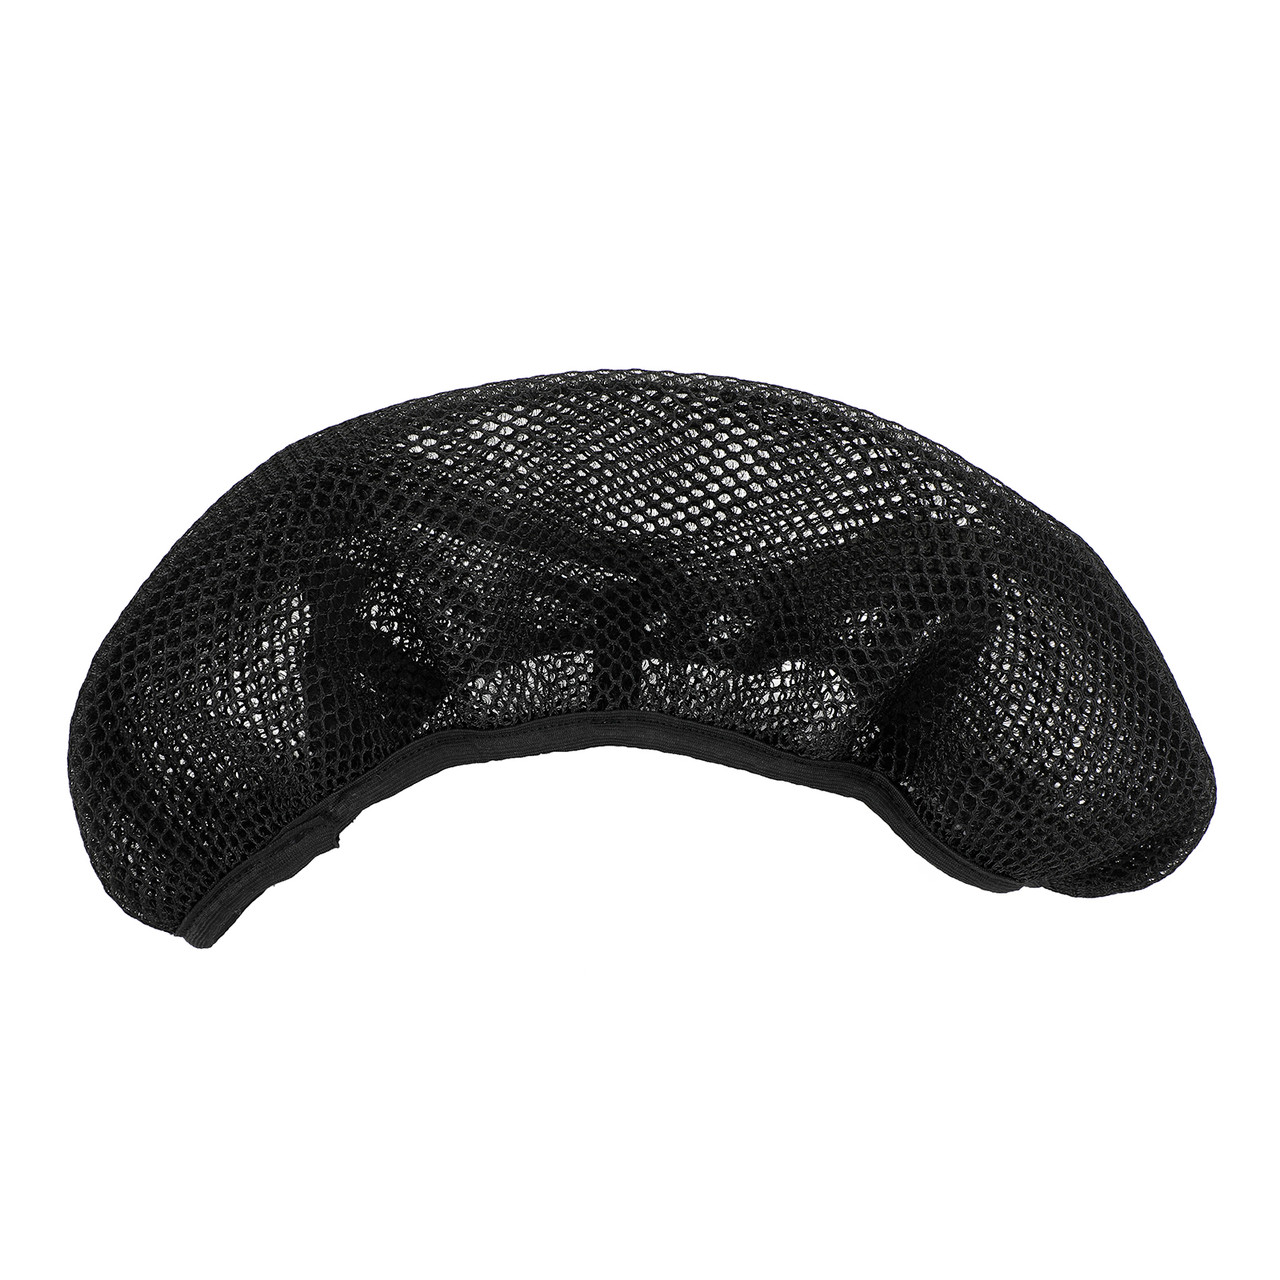 Heat-Resistant Net Seat Mesh Cover Universal M For Motorcycle Scooter Motorbike